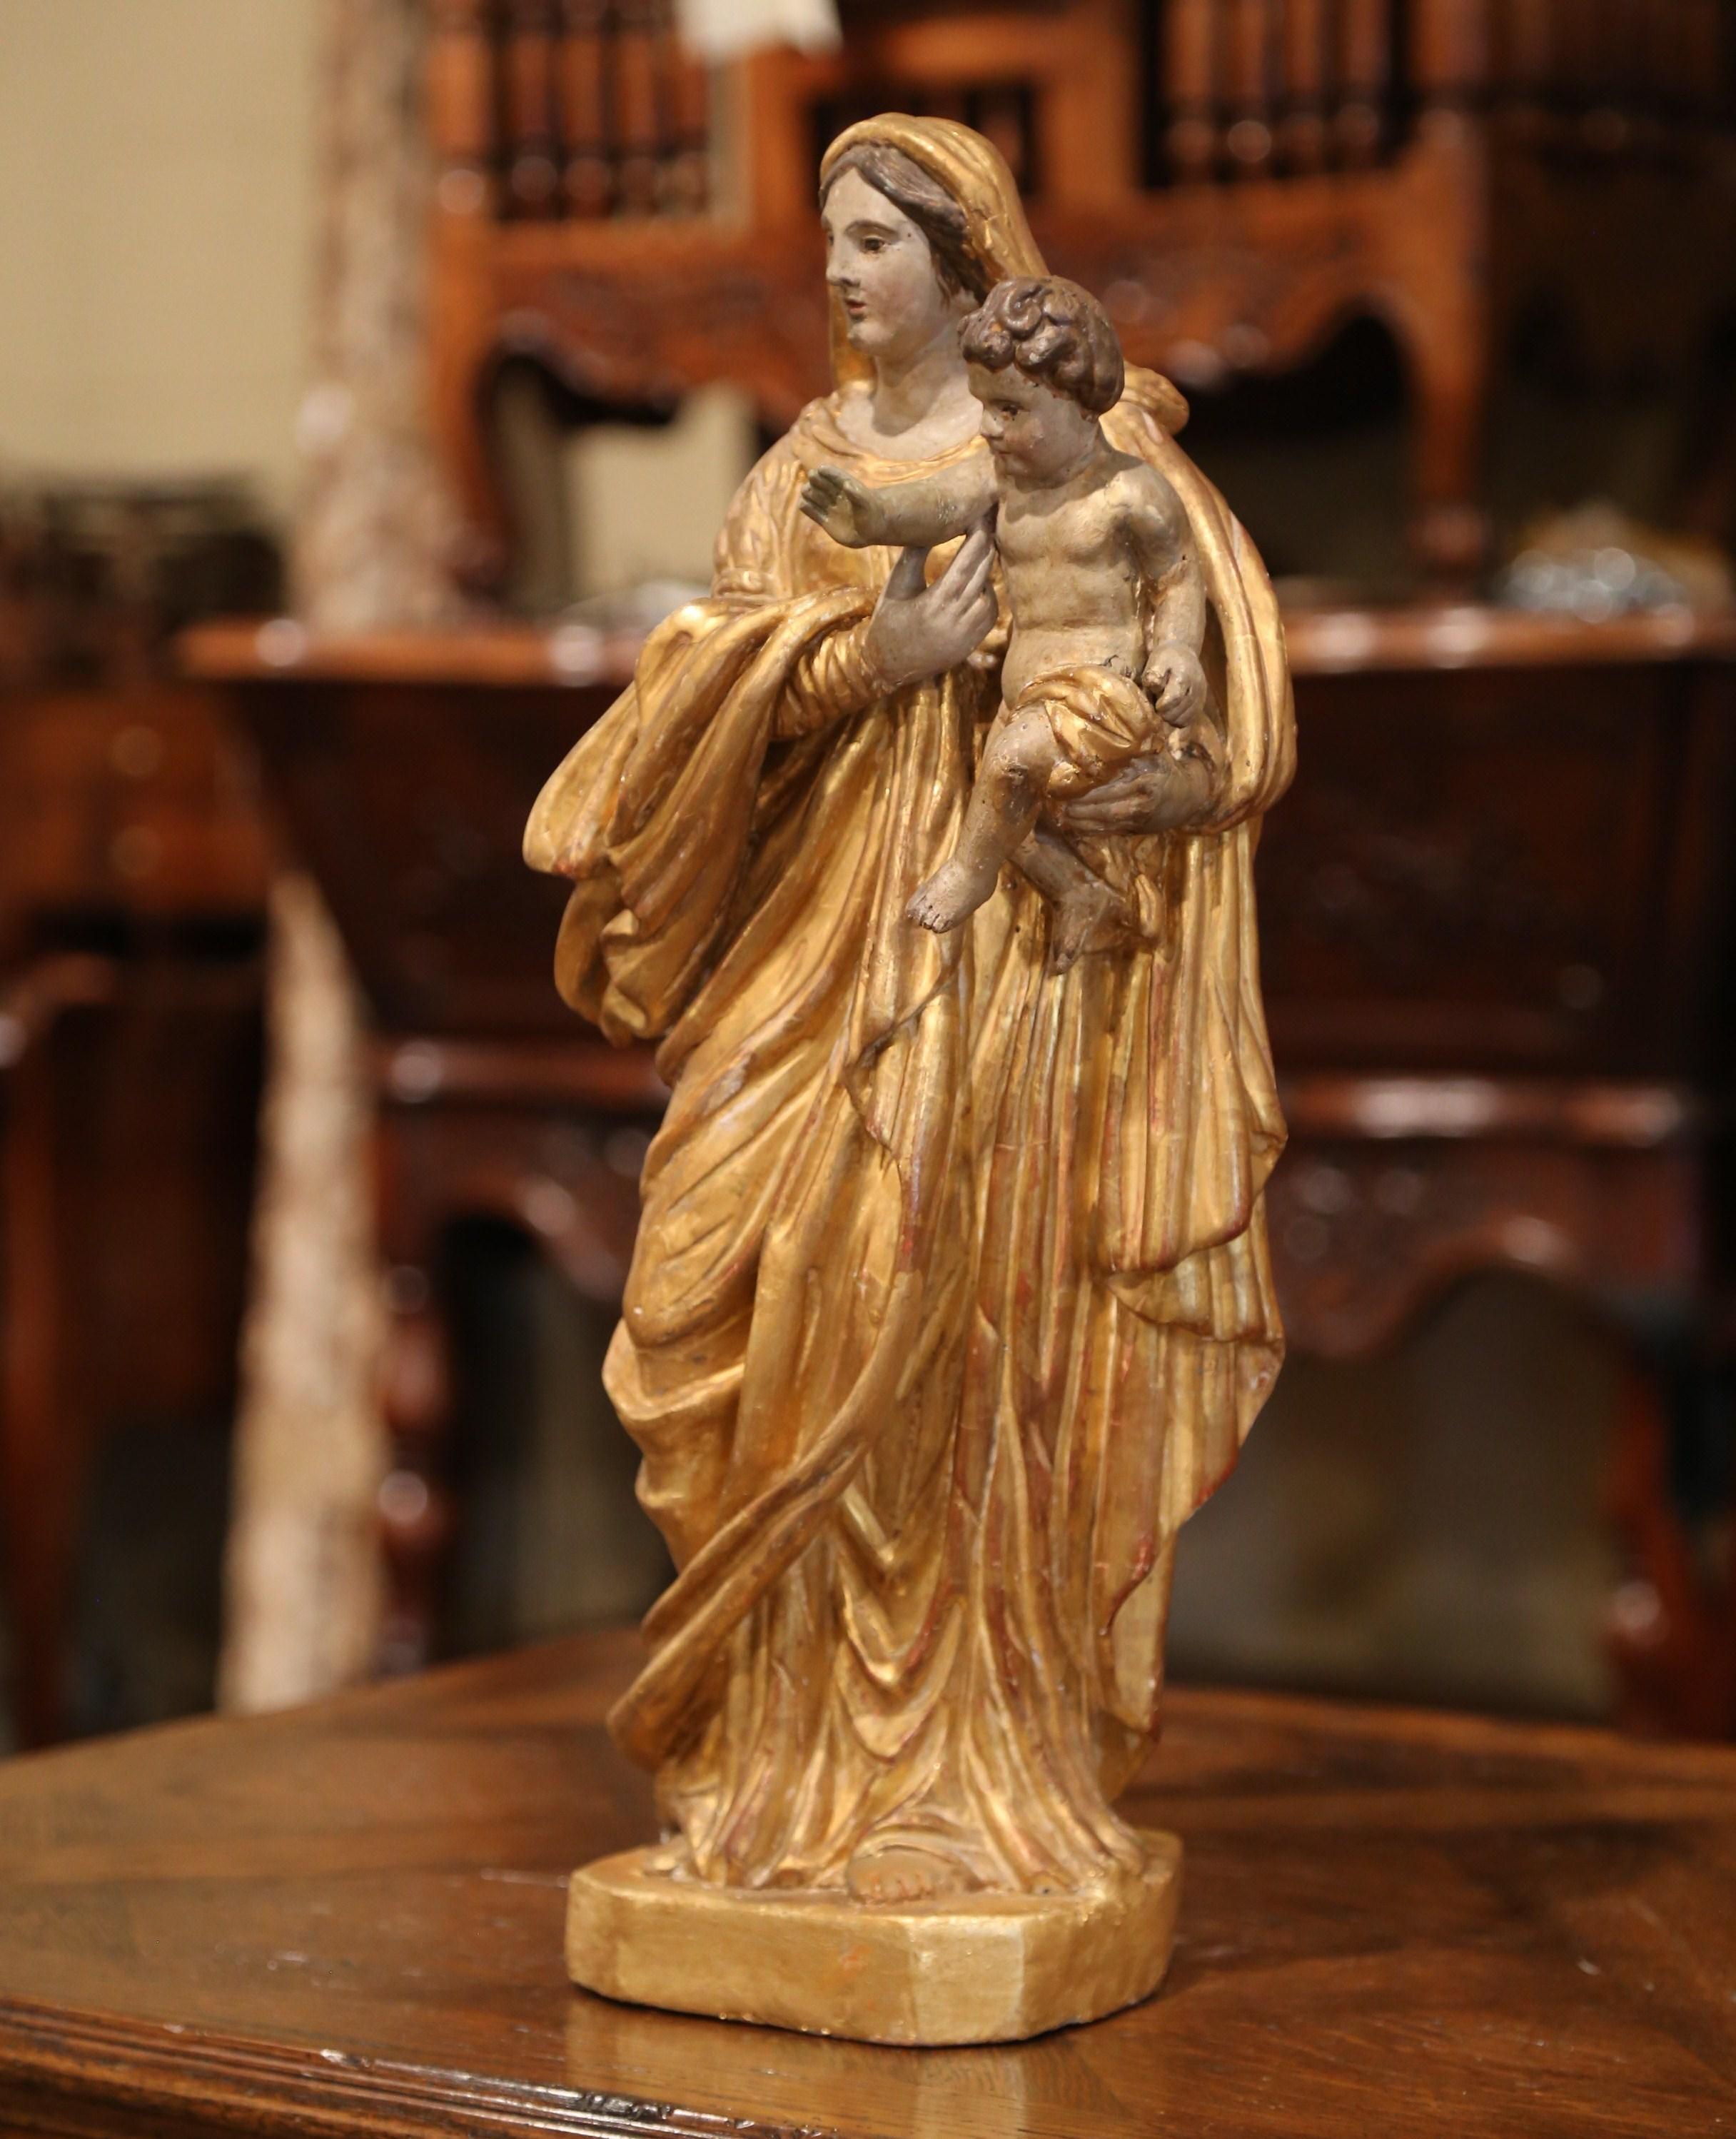 This elegant antique statue of the Virgin Mary and her Son, found in a chapel, was carved in Southern France, circa 1780. The large alluring polychrome and gilt sculpture in high relief, features Madonna carrying our Lord Jesus Christ with His right